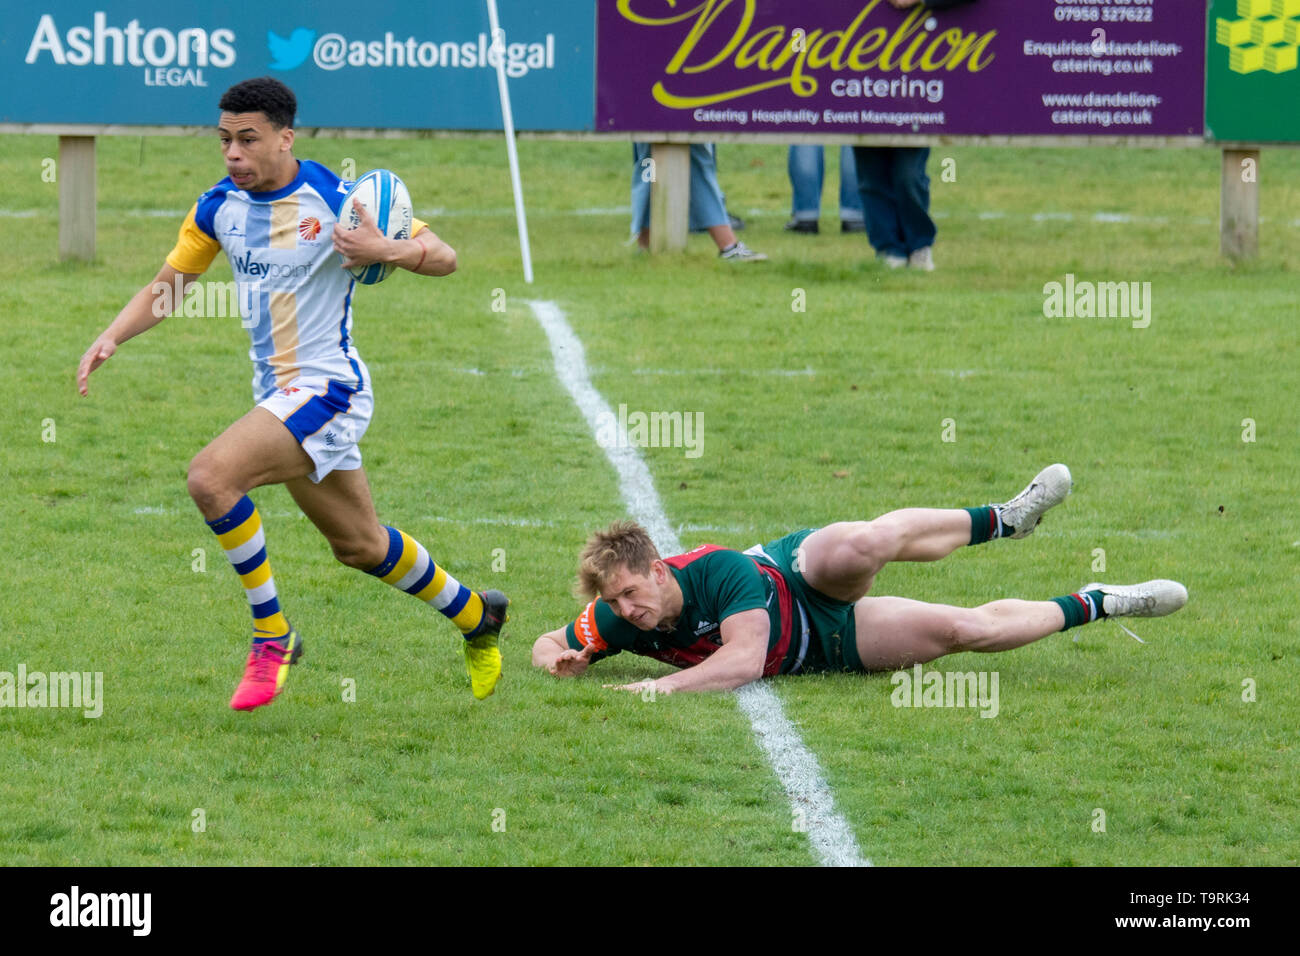 Bury St Edmunds Rugby Sevens 2019 - Apache vs Leicester Tigers Stockfoto